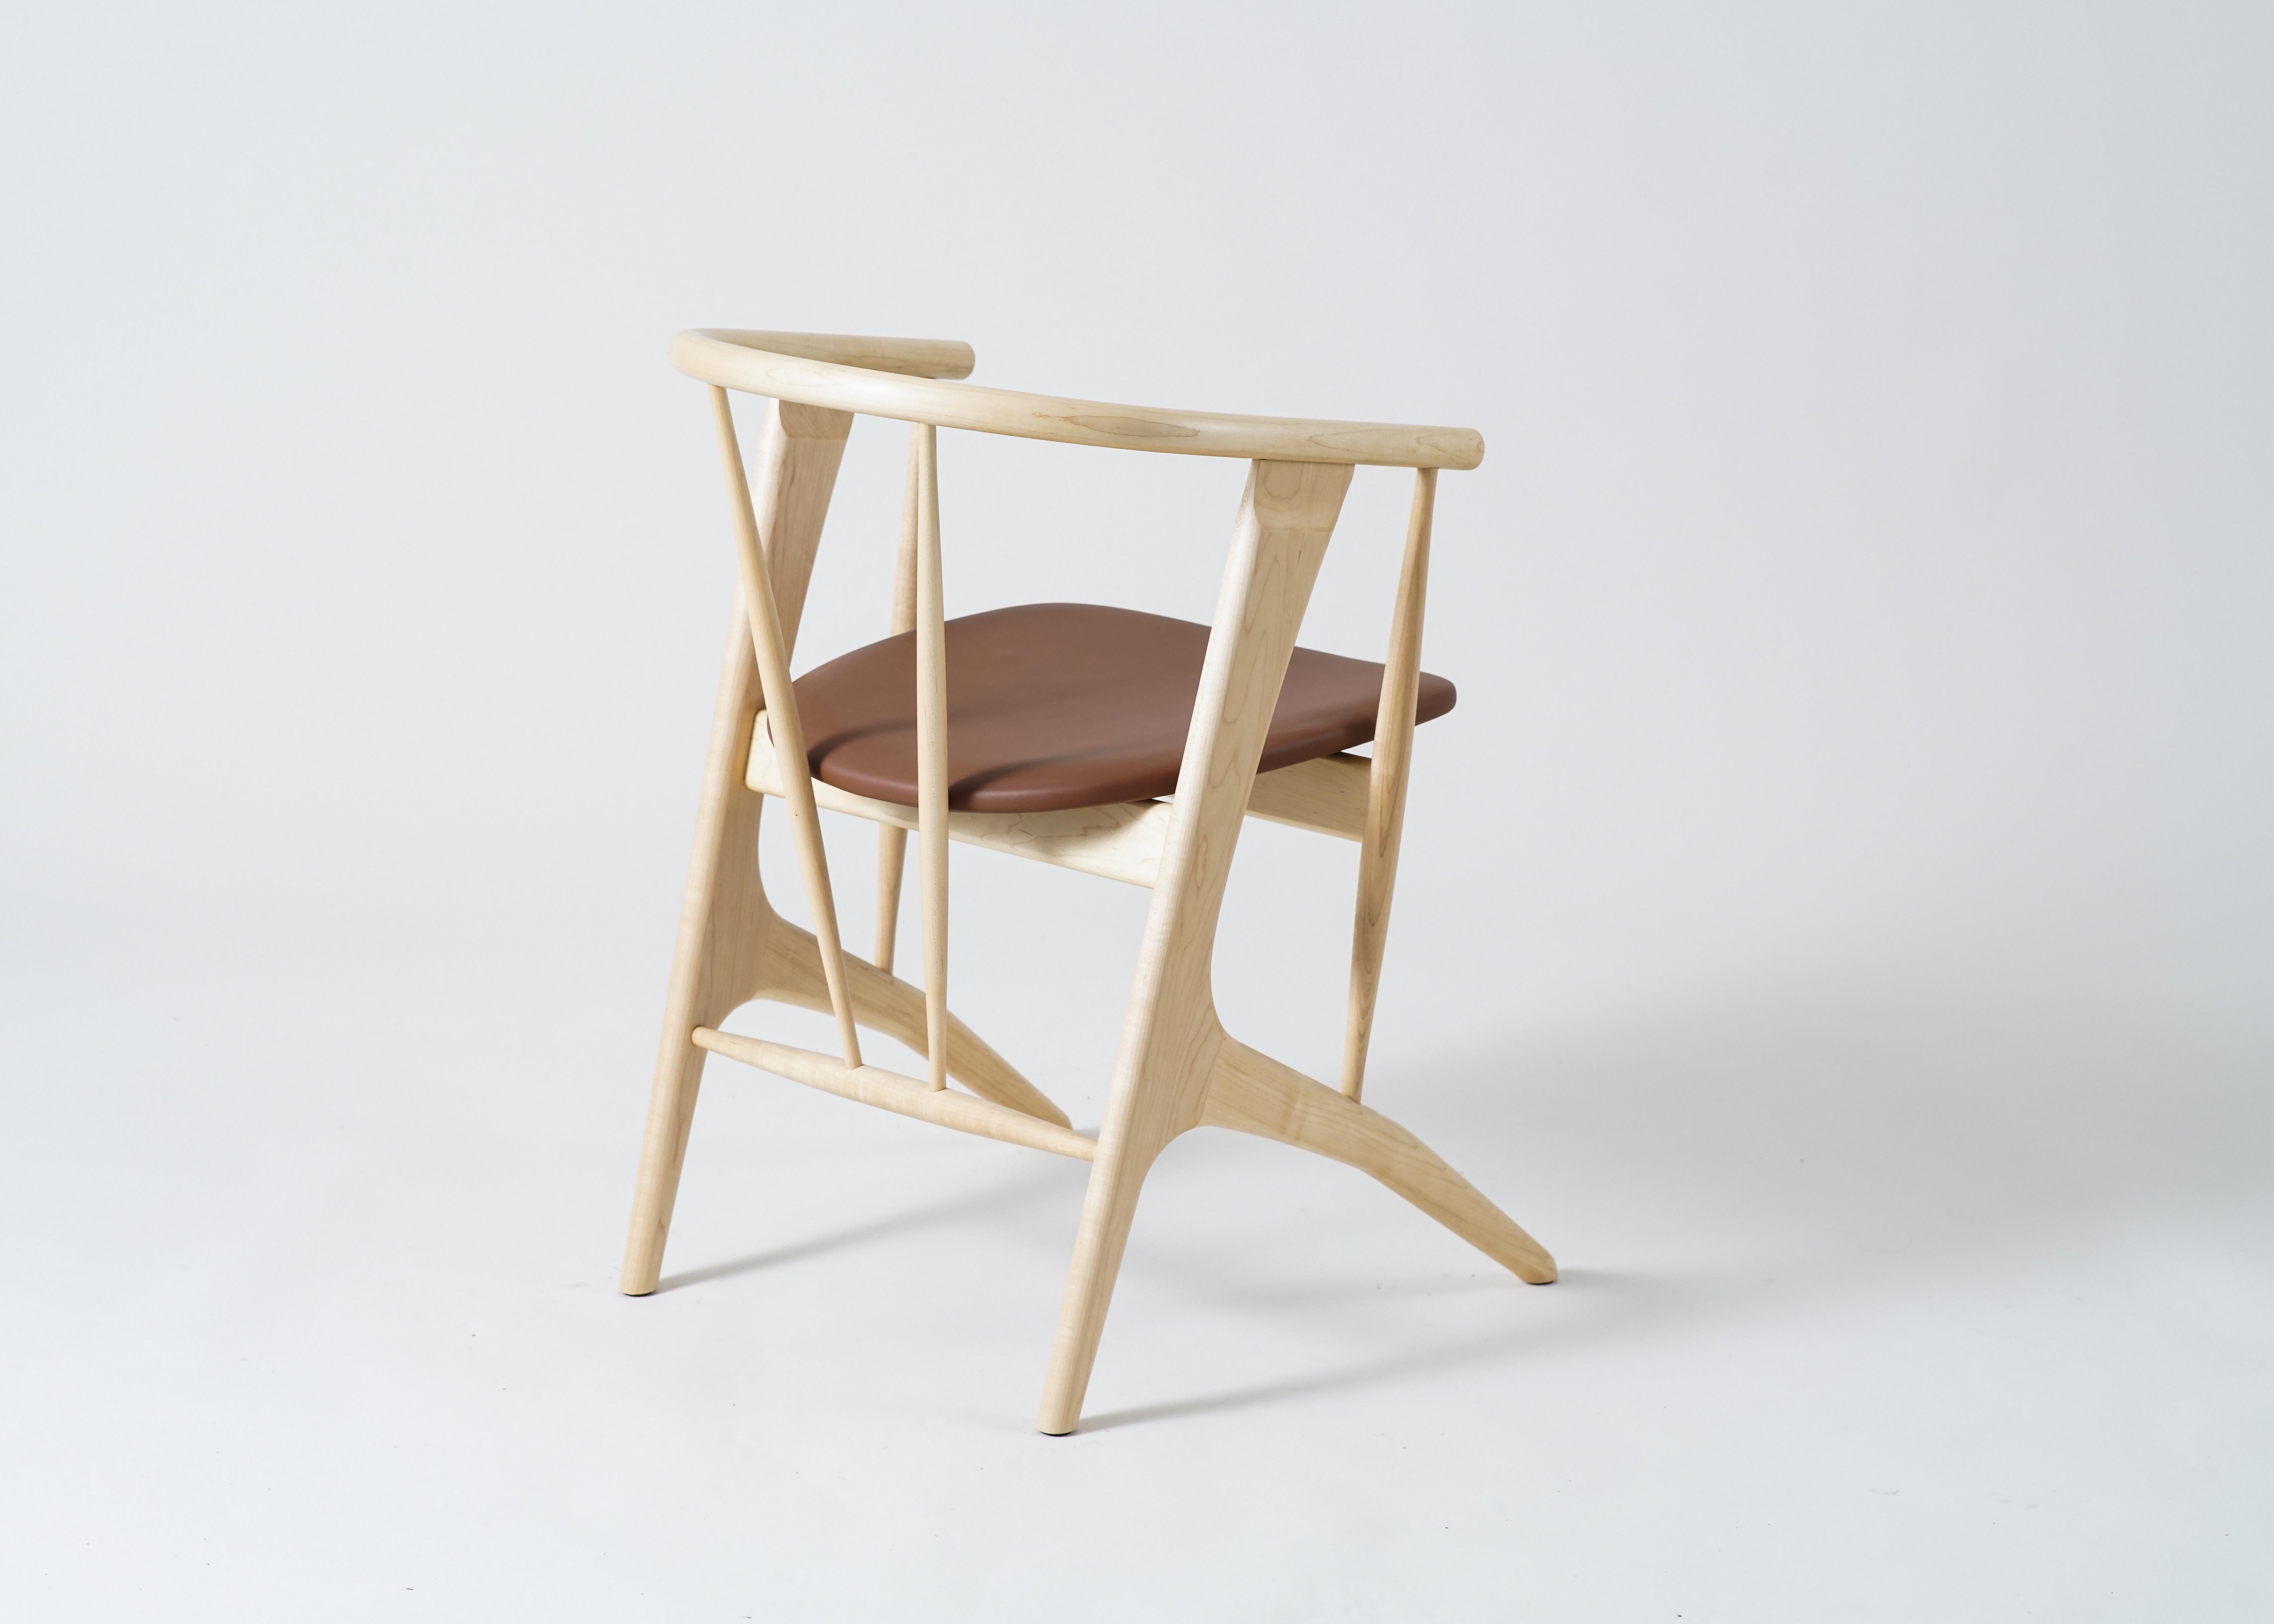 Phloem Studio Zoe chair is a modern contemporary solid wood armchair handmade custom to order.
Zoe is a highly crafted, highly comfortable lightweight armchair designed for long dinner parties or a working late. The angled solid steam bent back